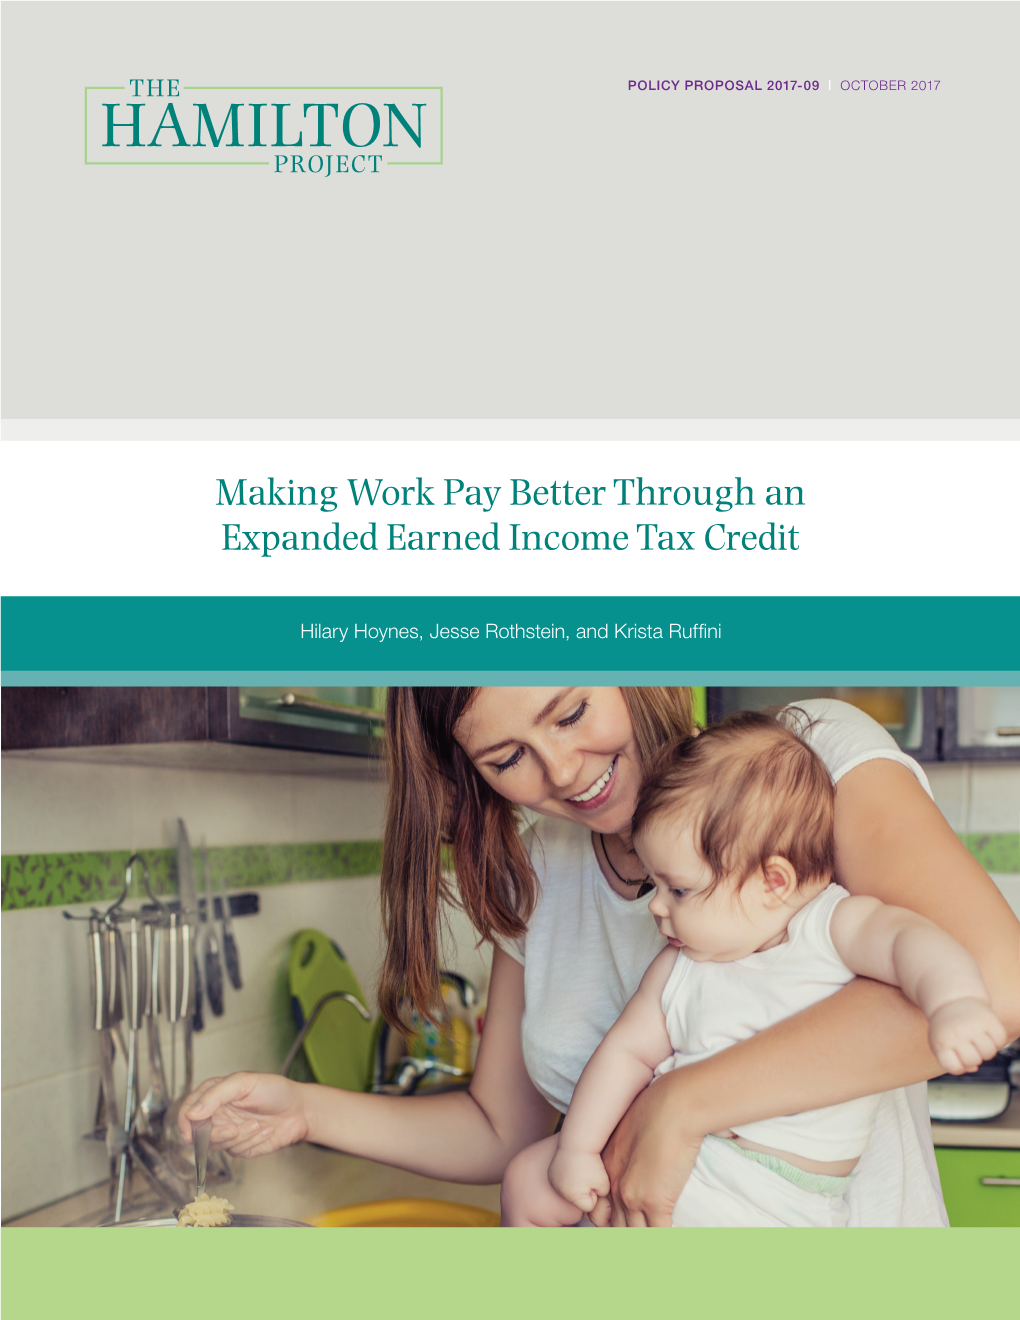 Making Work Pay Better Through an Expanded Earned Income Tax Credit